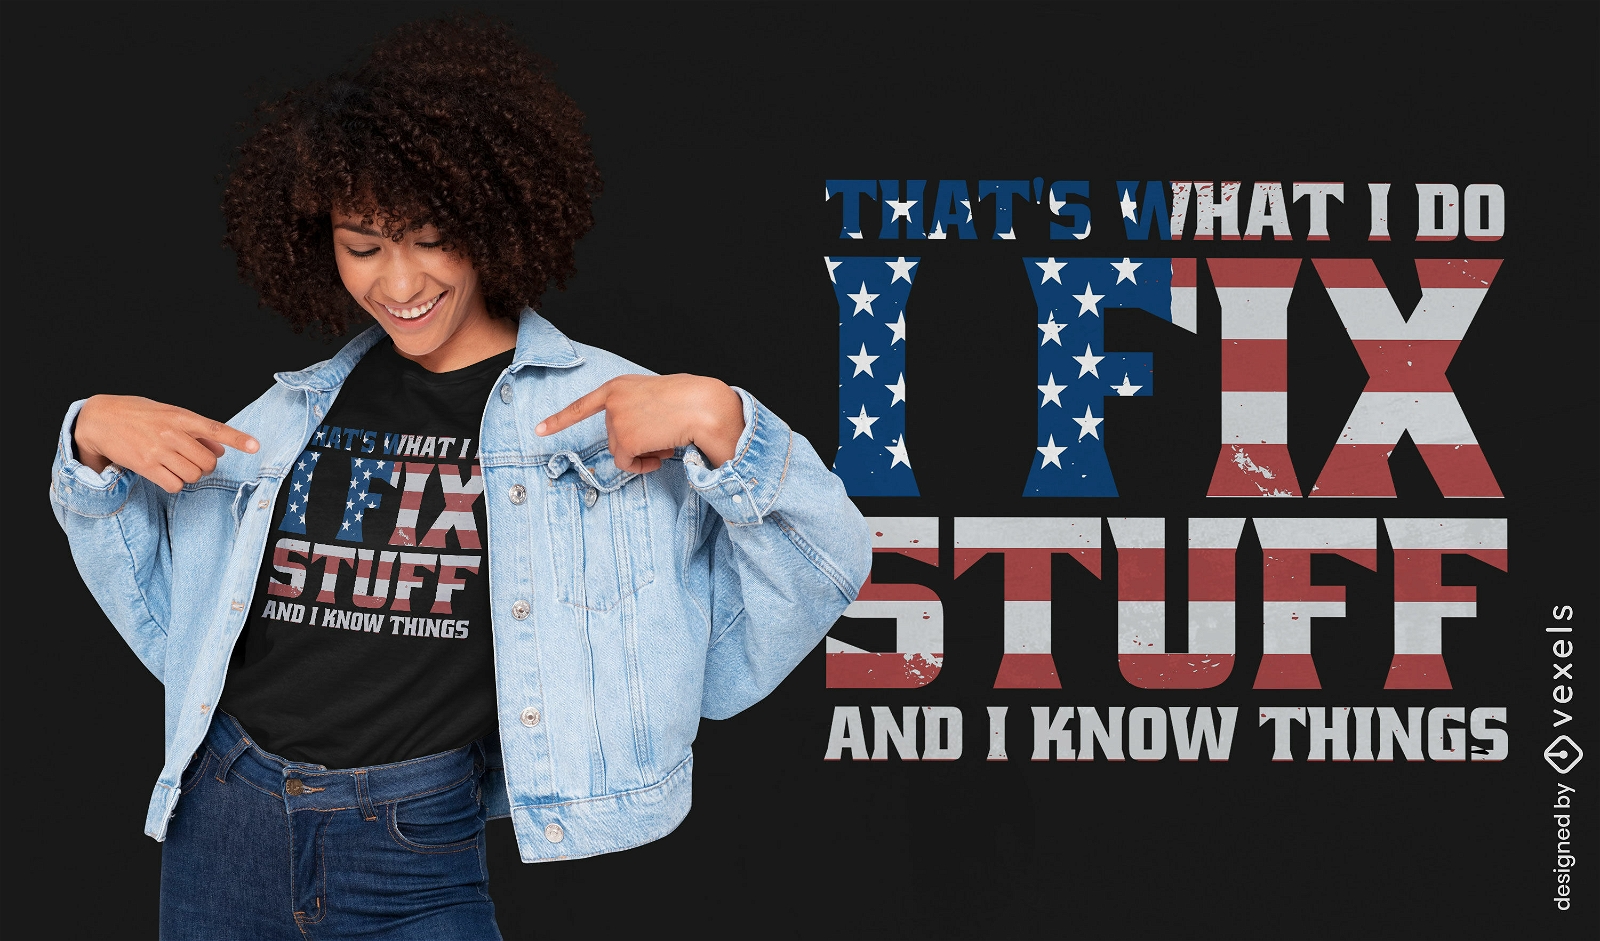 American funny quote t-shirt design